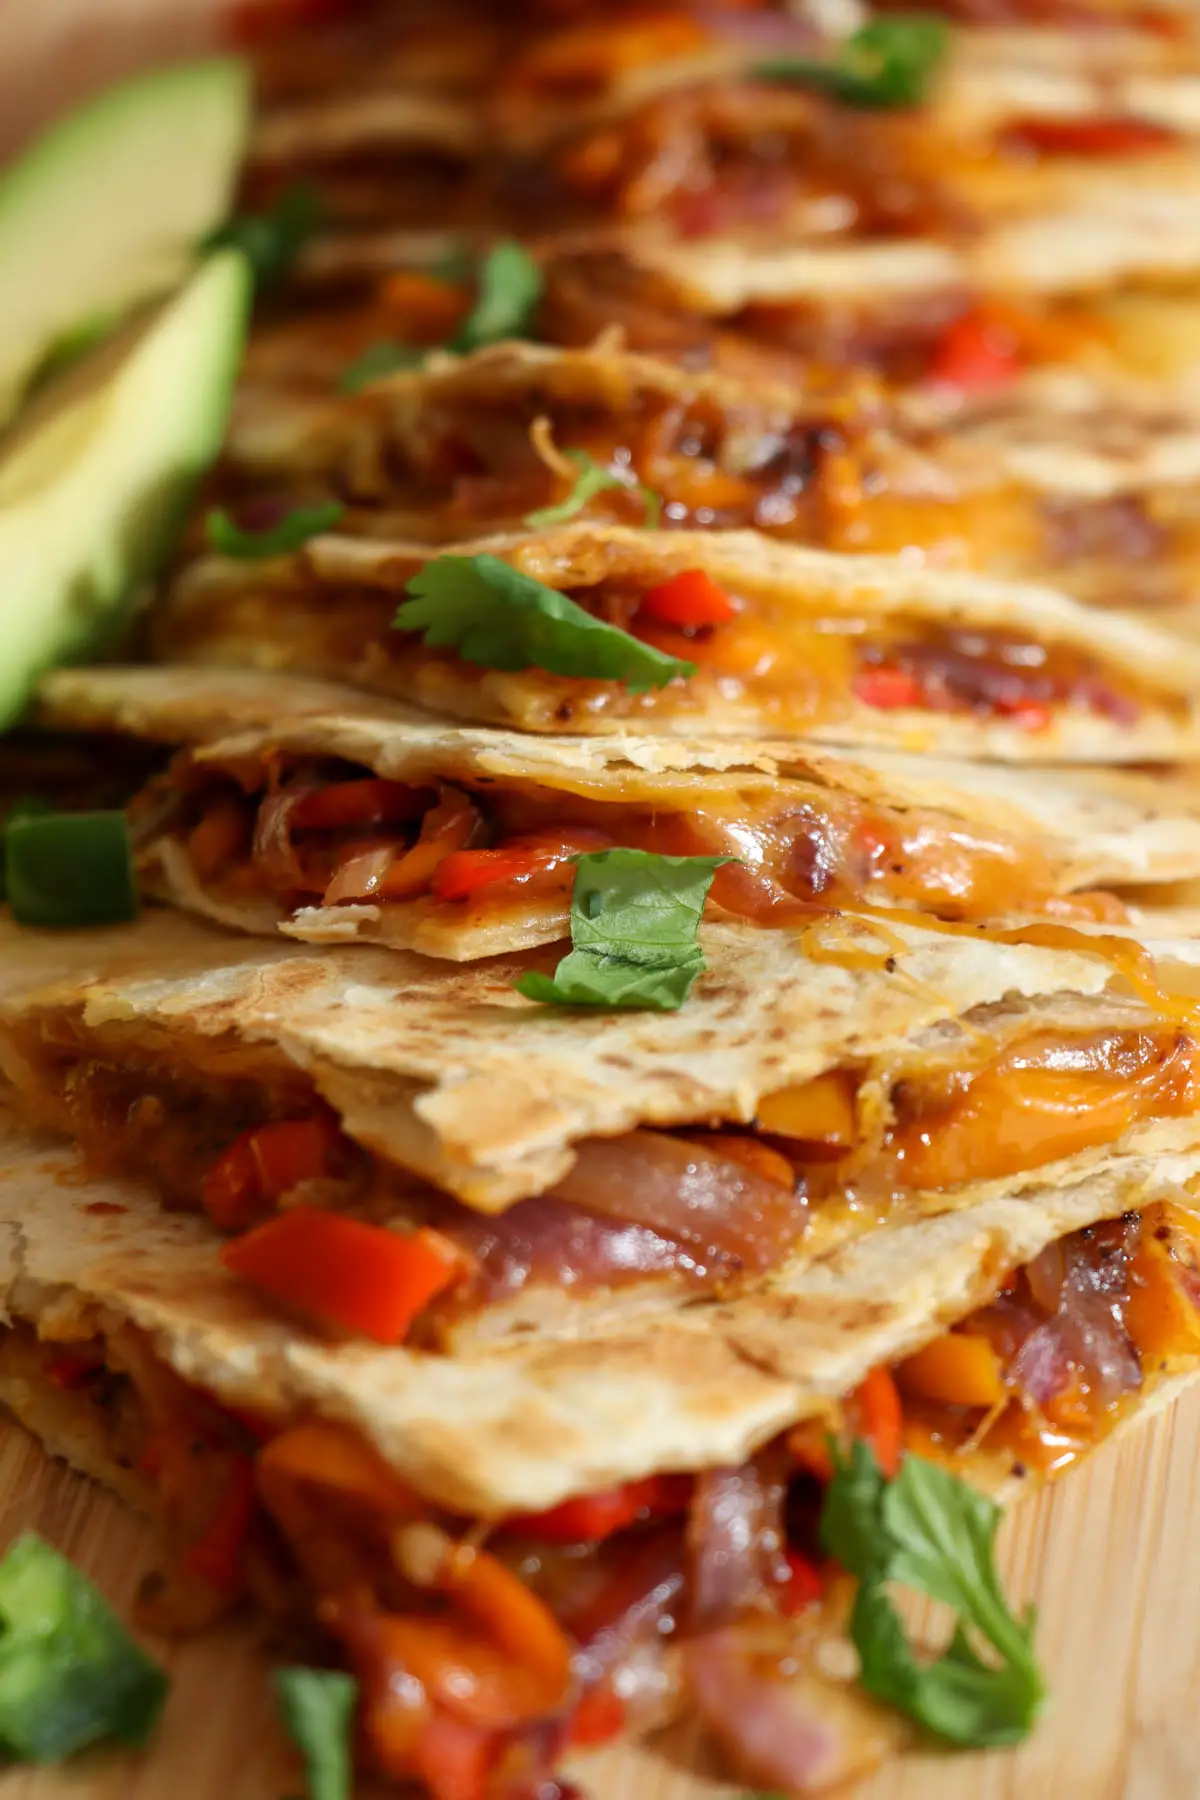 Quesadillas filled with melted cheese and sautéed vegetable mixture. There are slices of avocado and cilantro leaves garnishing the quesadilla wedges.